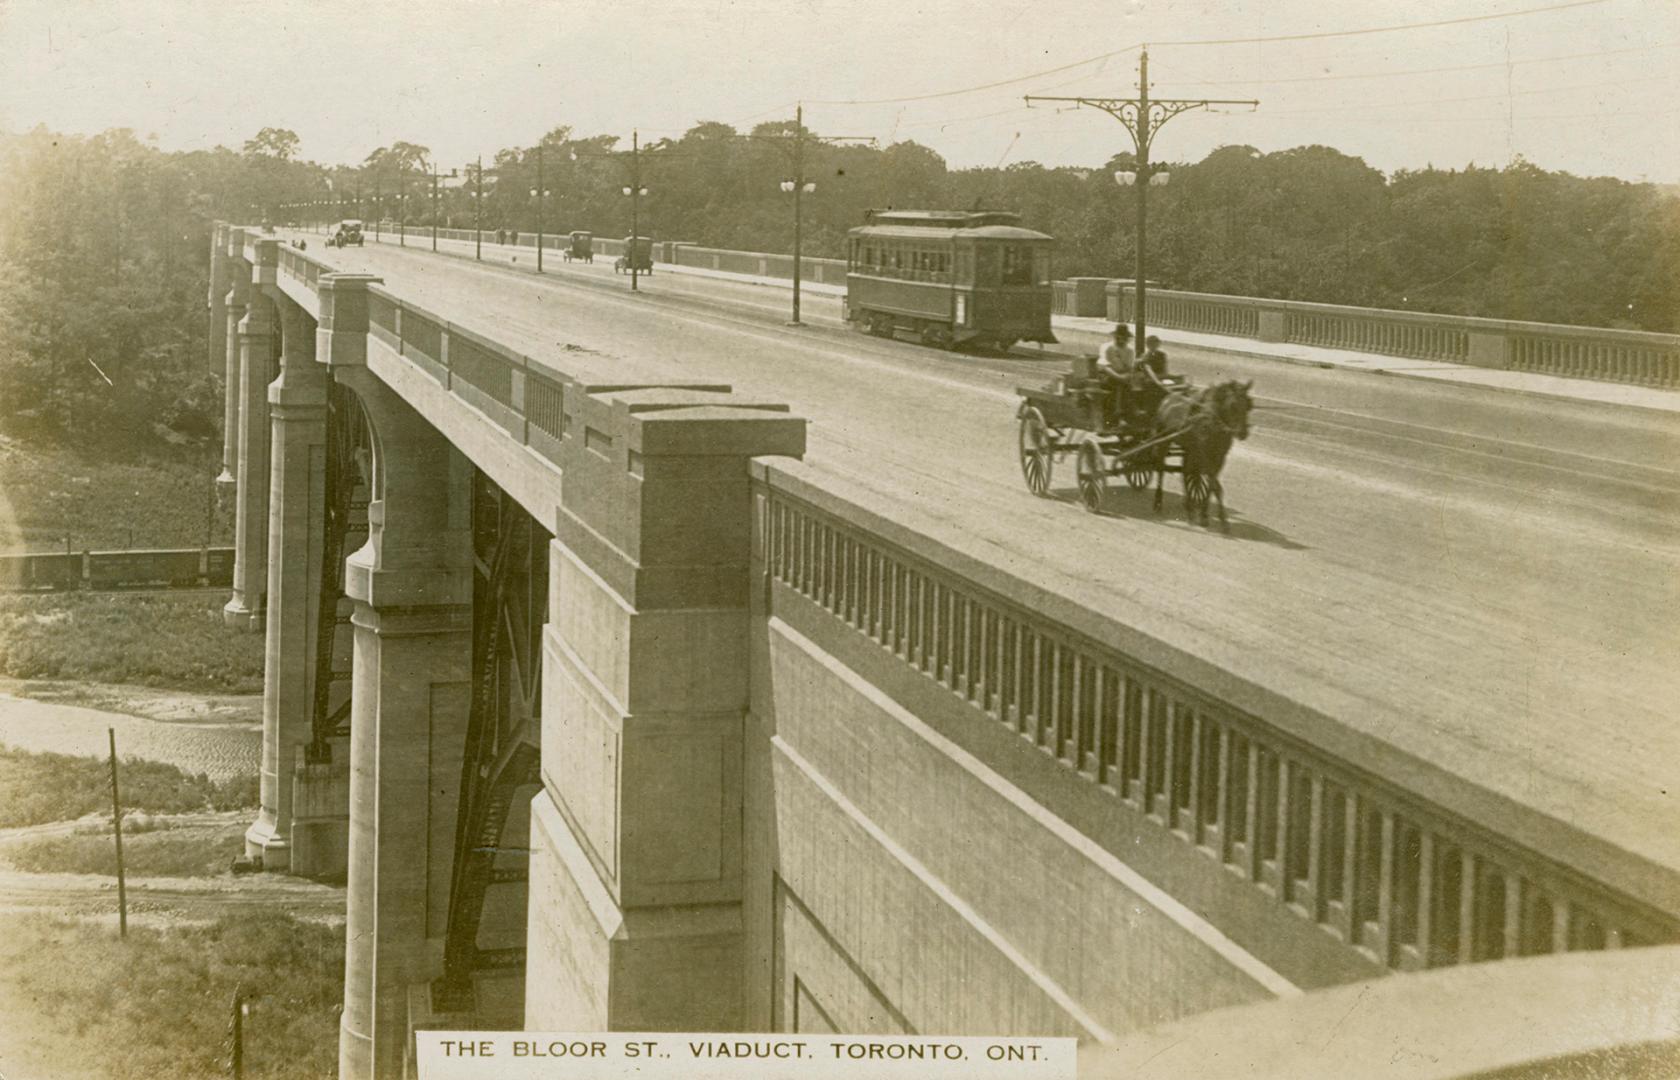 Black and white photograph of a street car and a horse and wagon driving across a bridge.